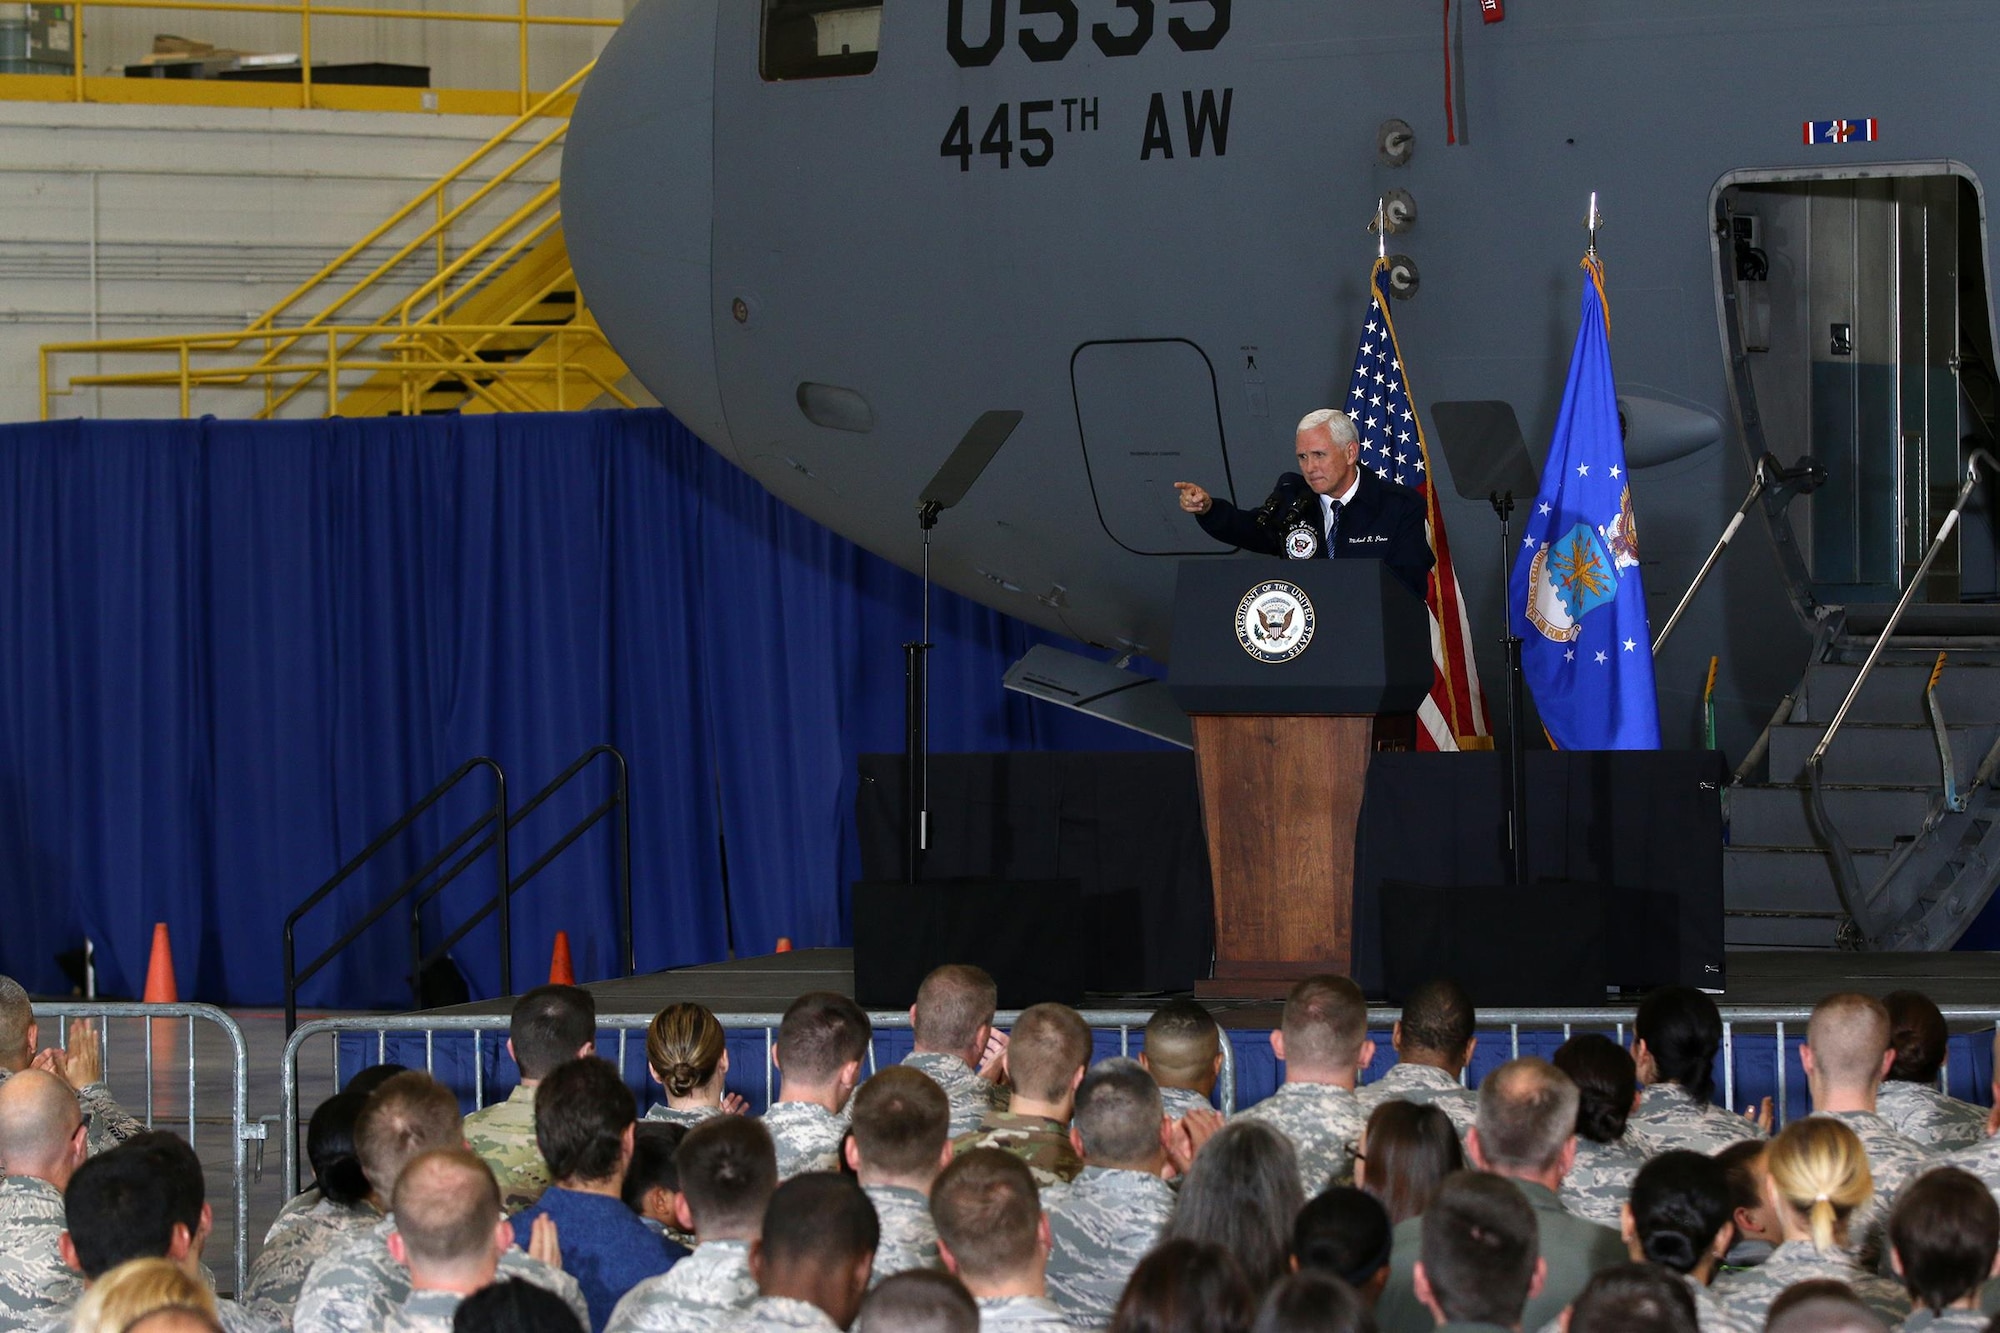 Vice President Mike Pence speaks to a crowd of approximately 250 Airmen and families inside a 445th Airlift Wing hangar Saturday, May 20, 2017. The vice president visited Wright-Patterson Air Force Base to commemorate Armed Forces Day. (U.S. Air Force photo/Tech. Sgt. Patrick O’Reilly)